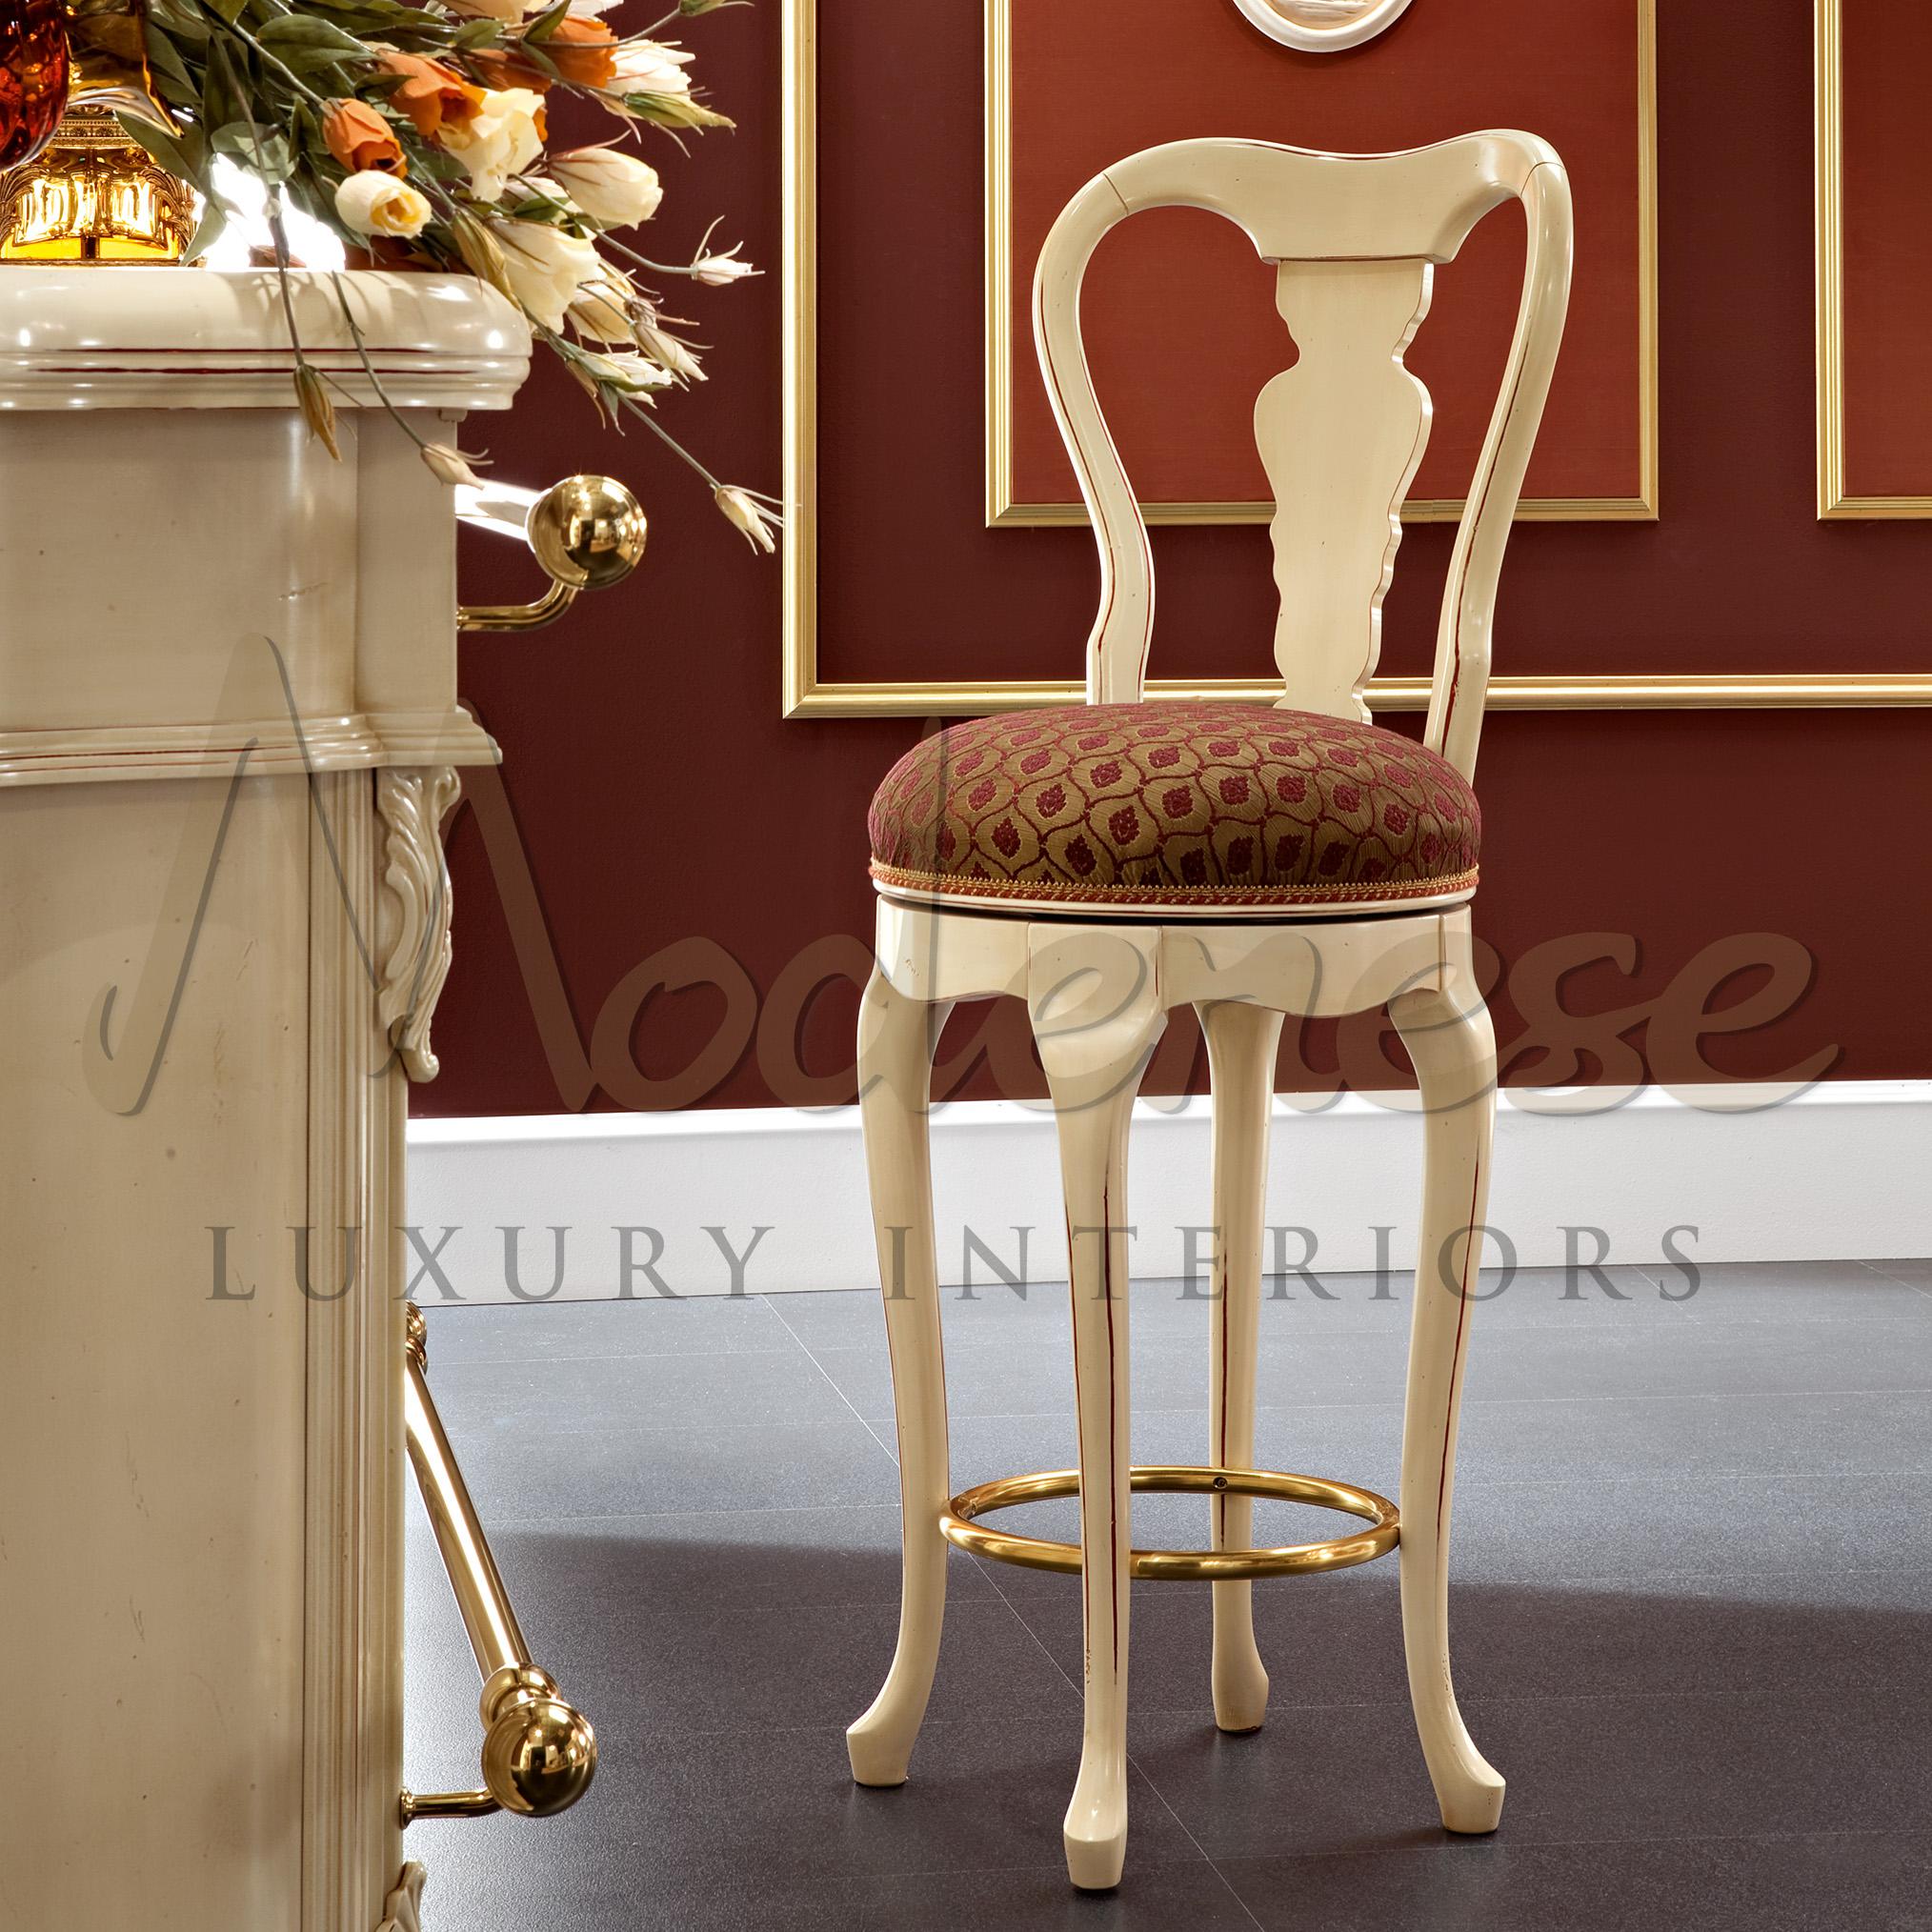 Elegant victorian bar stool in bright ivory finish and antiqued polishing with red satin upholstery and golden metal round frame. This seating element, which pairs with the Modenese Home Bar set (featuring a bar counter and chairs), is thoughtfully